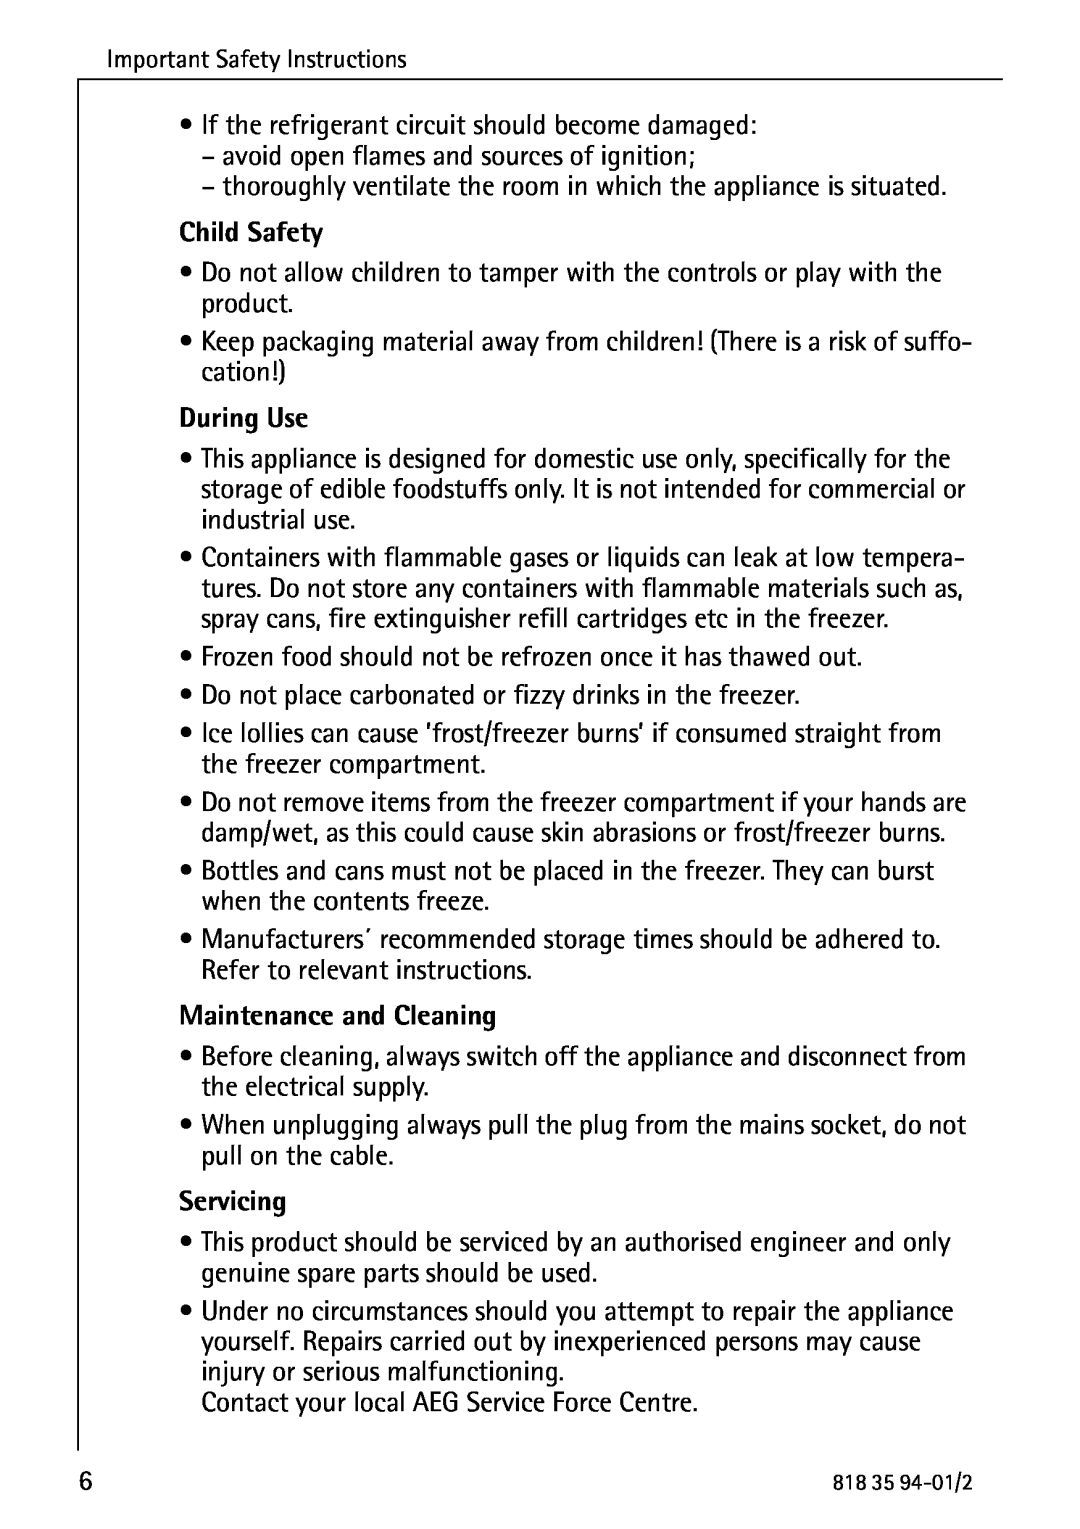 Electrolux U31462 operating instructions Child Safety, During Use, Maintenance and Cleaning, Servicing 